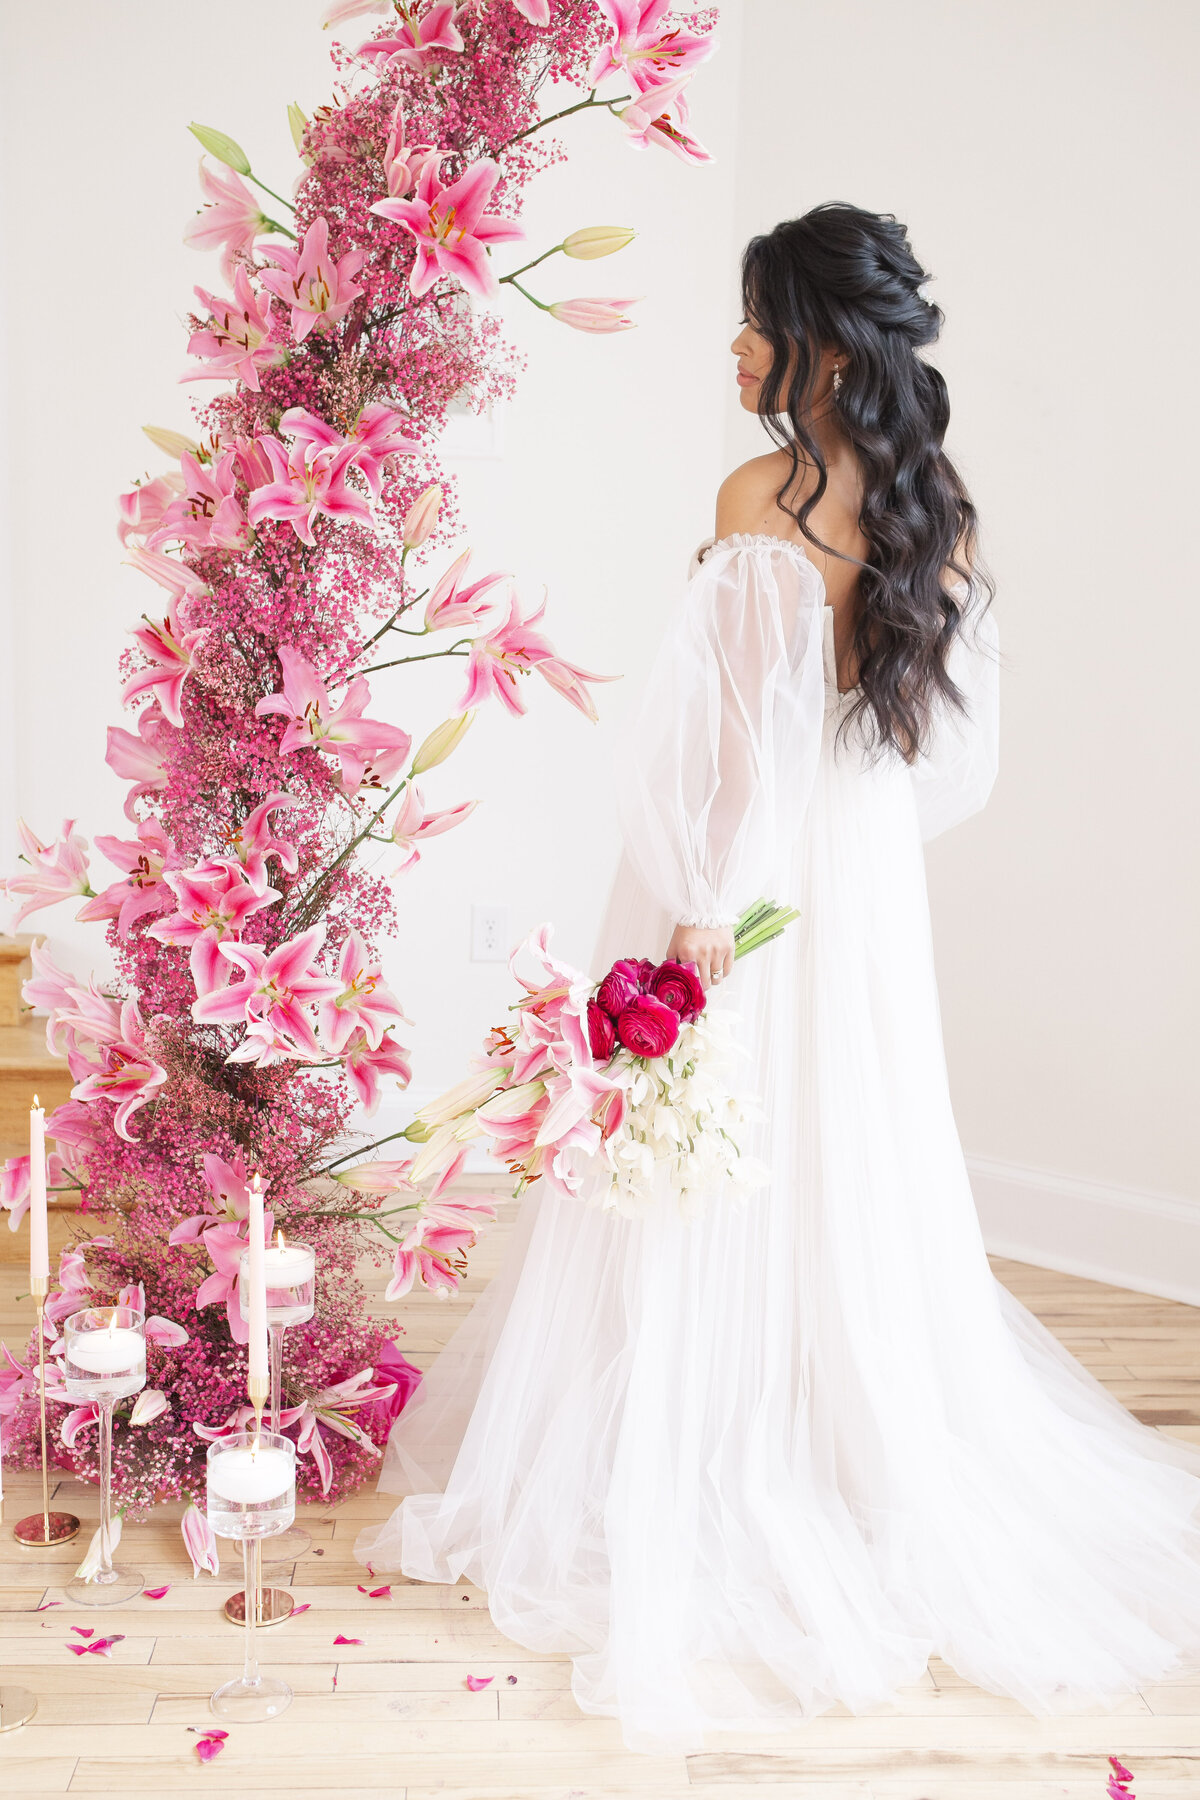 bride next to floral arch of pink and white lilies